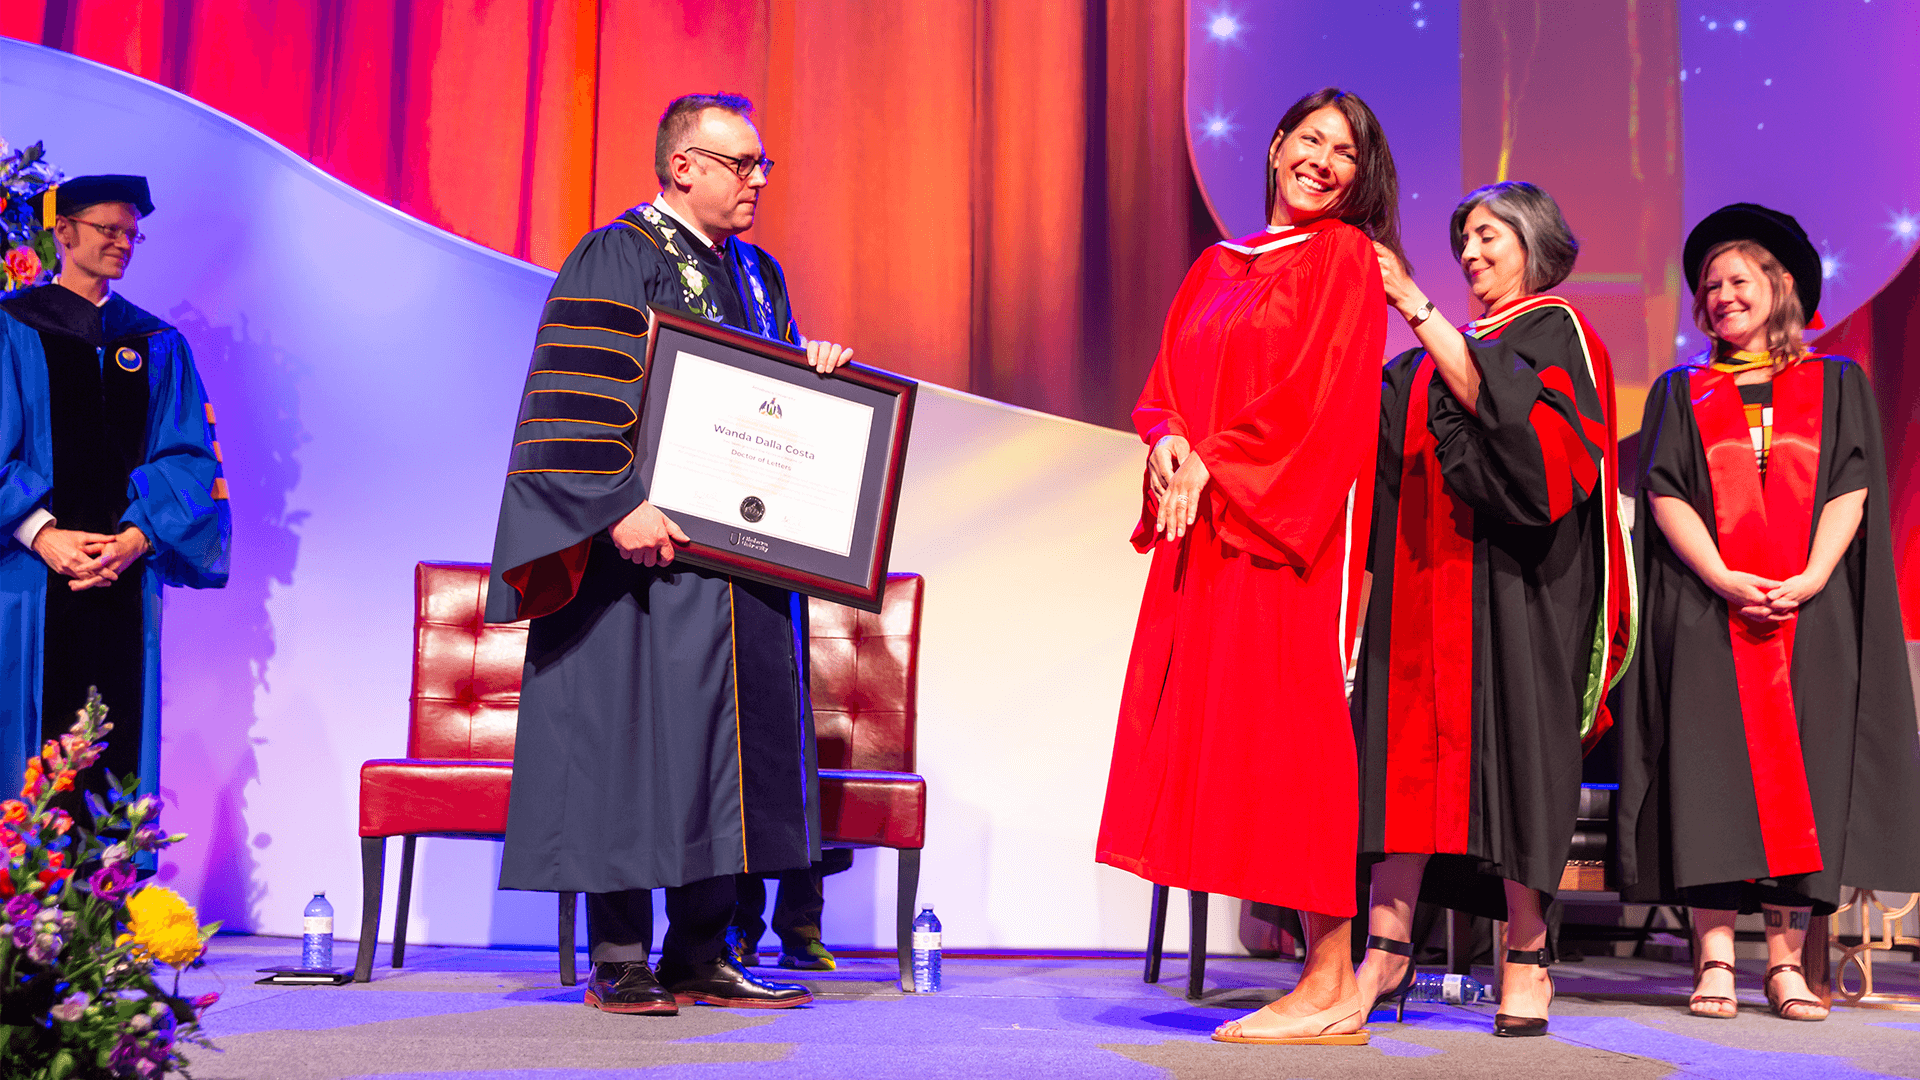 Dr. Alex Clark holding an honoary degree for Wanda Dalla Costa who is receiving her hood from faculty of humanities and social sciences dean Dr. Manijeh Mannani